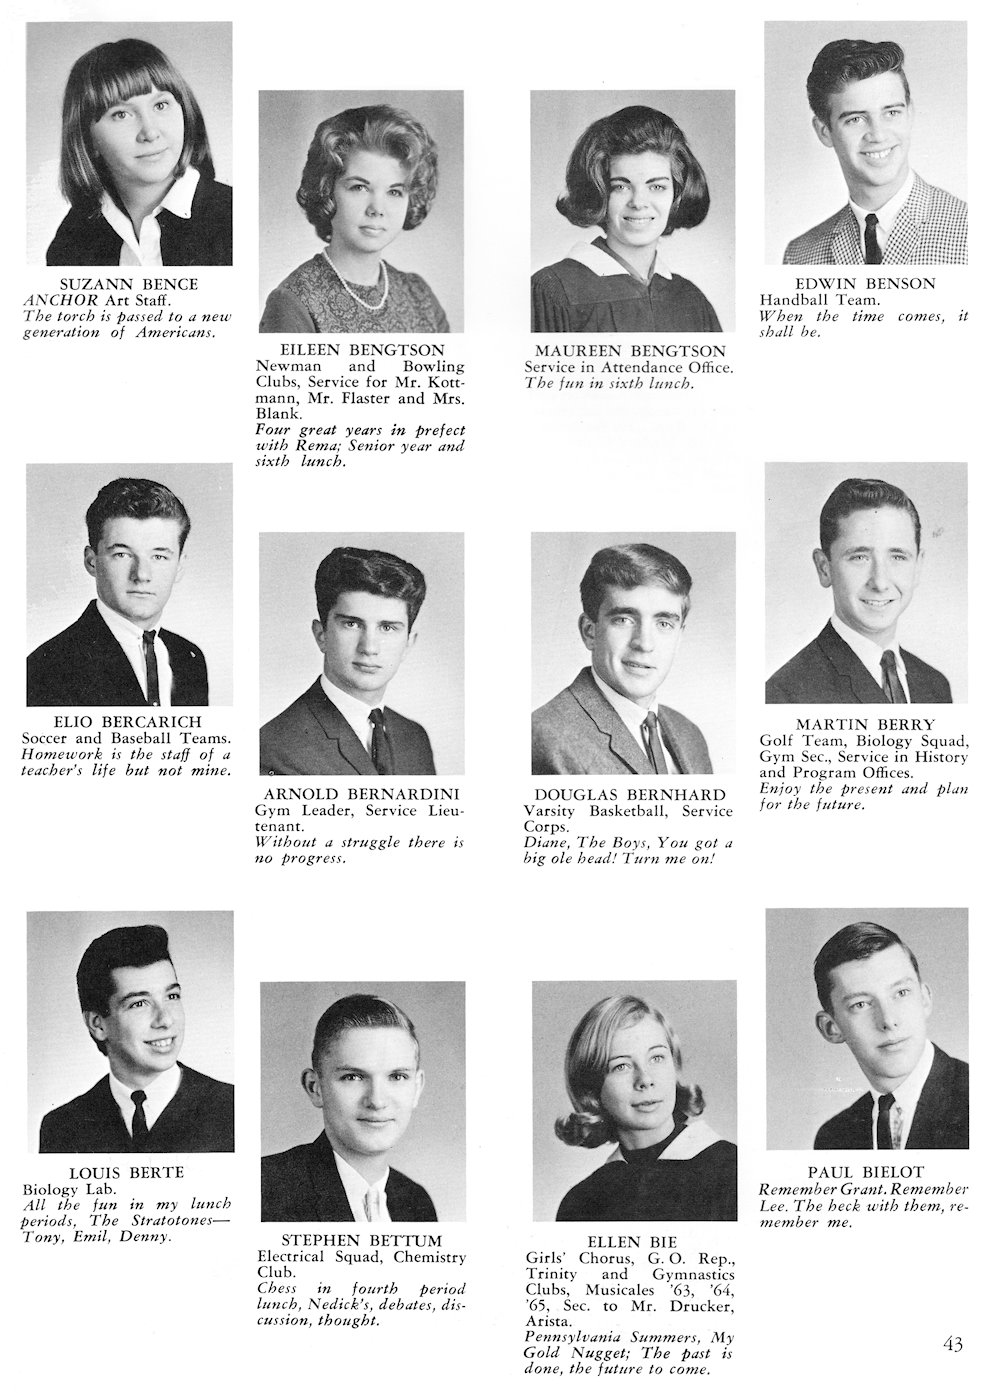 Bence-Bielot page from Fort Hamilton High School 1965